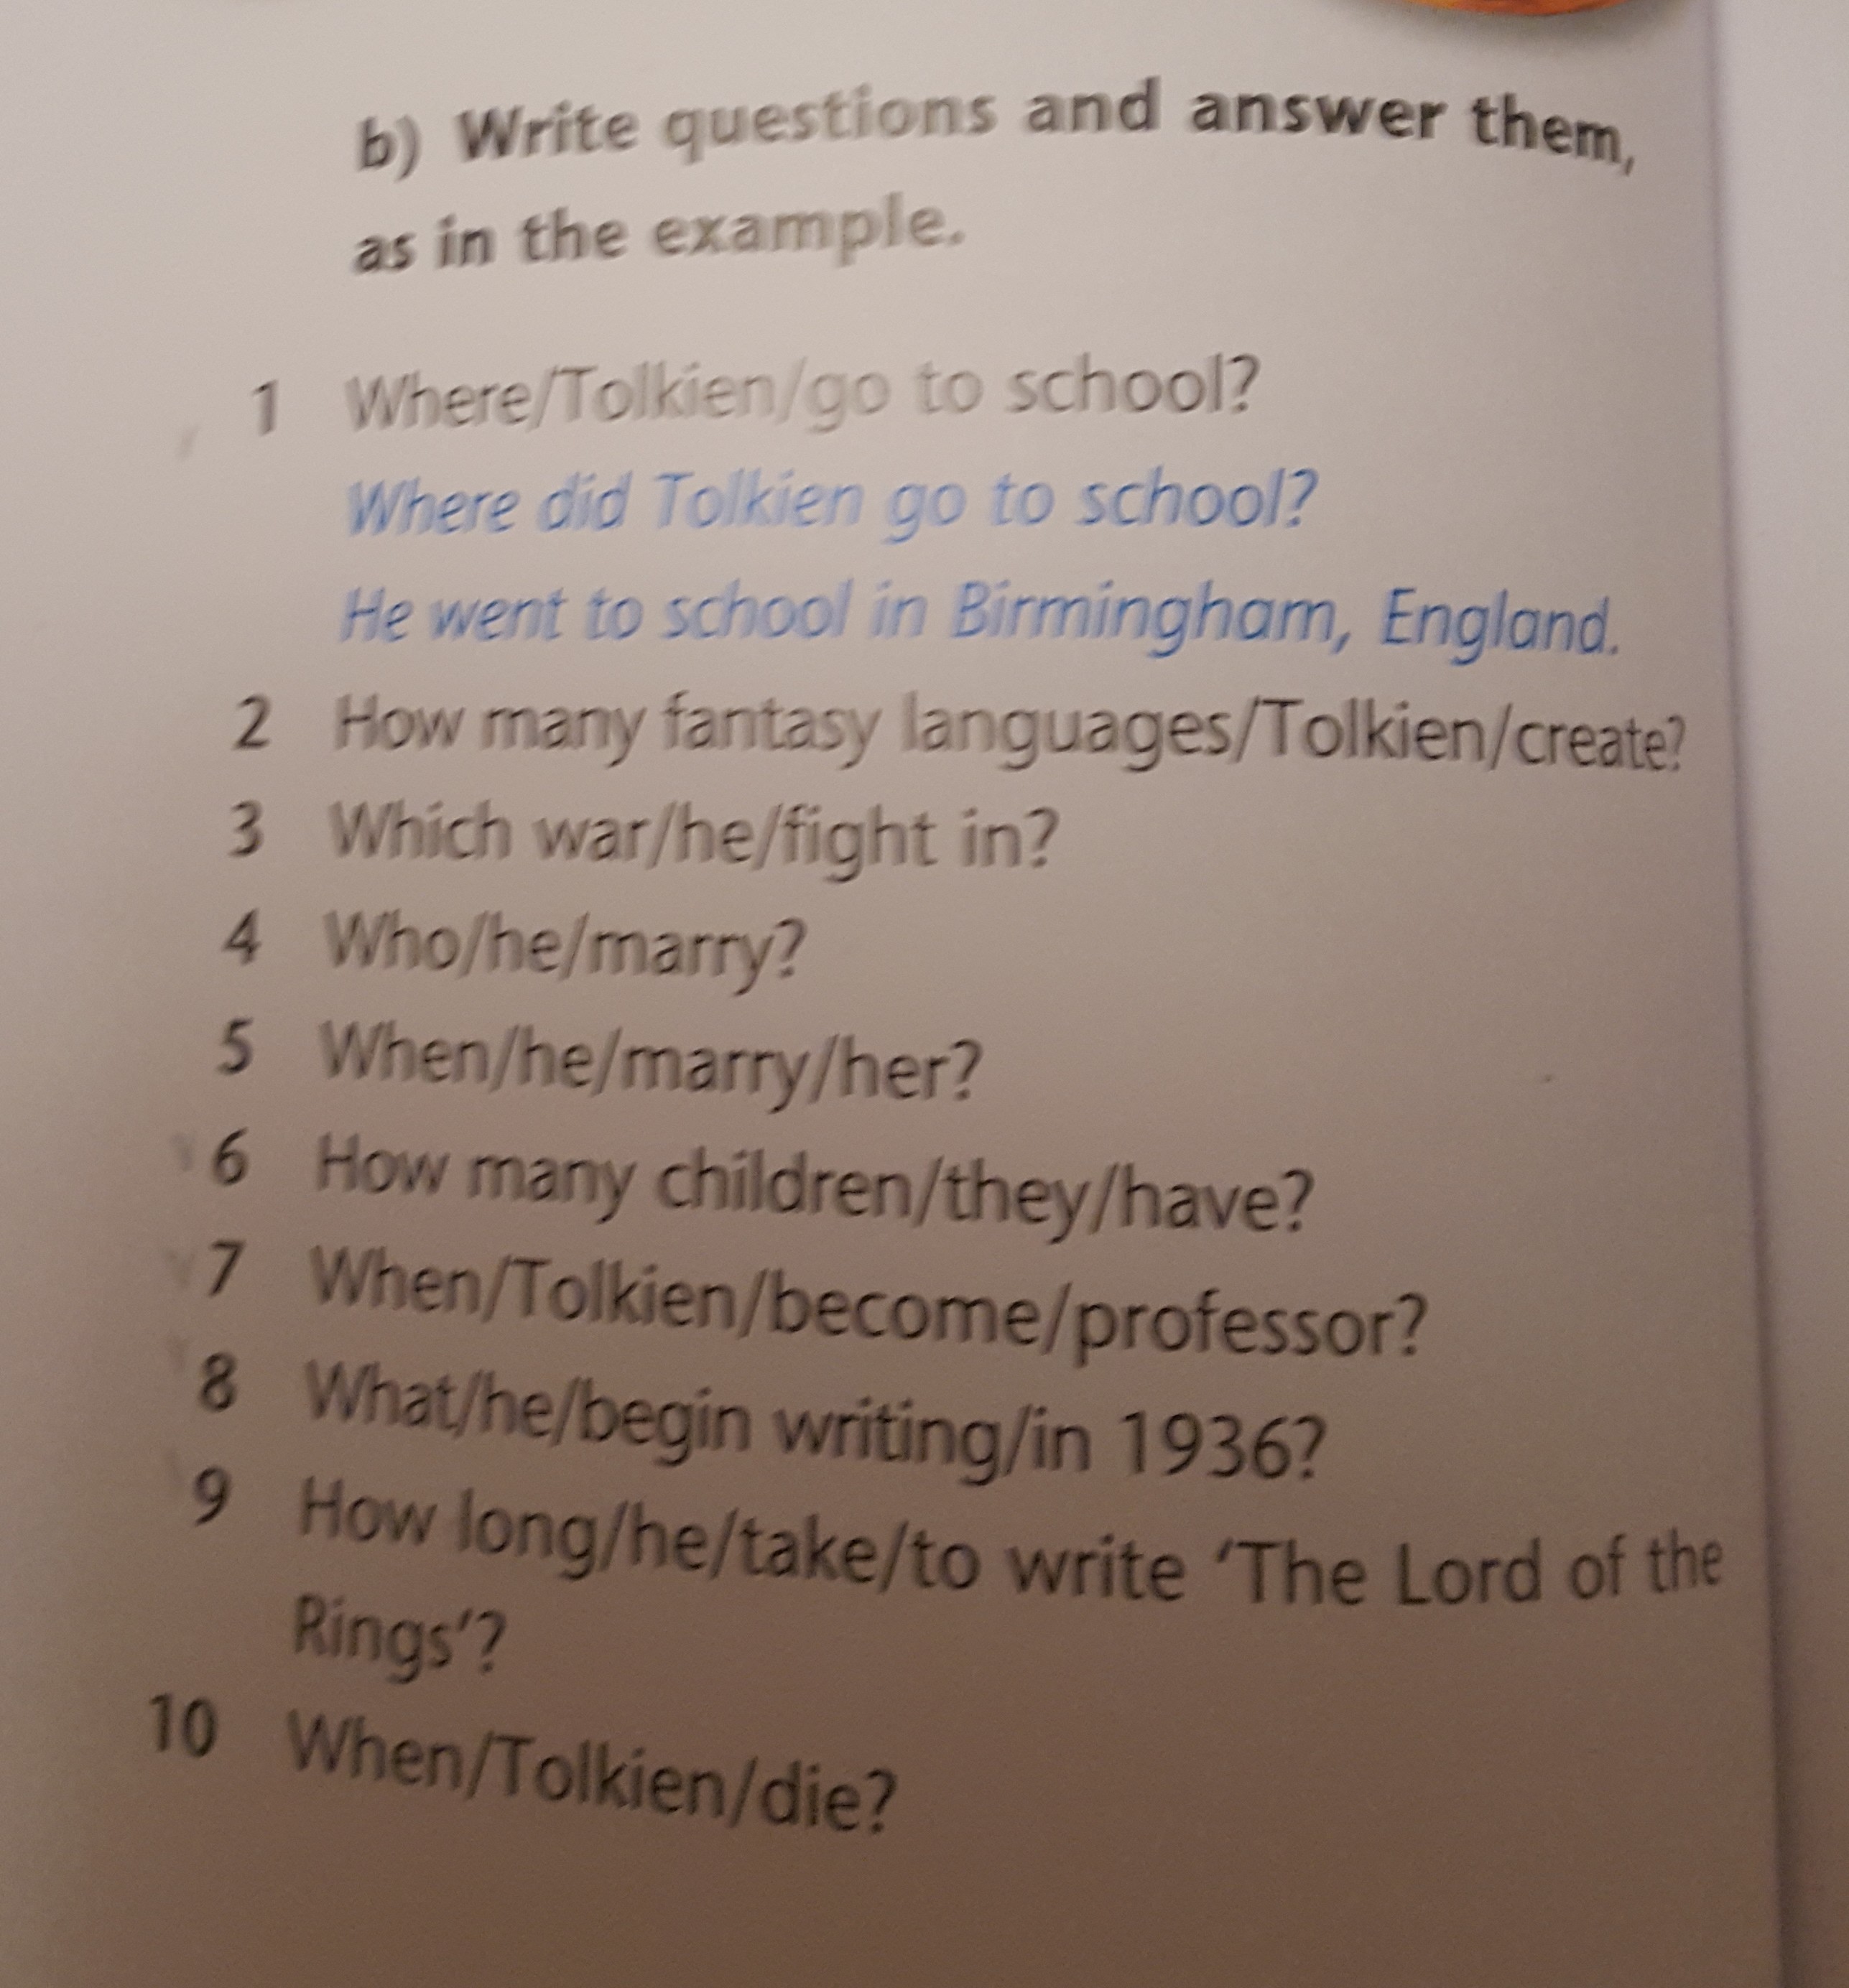 Complete the questions and short answers